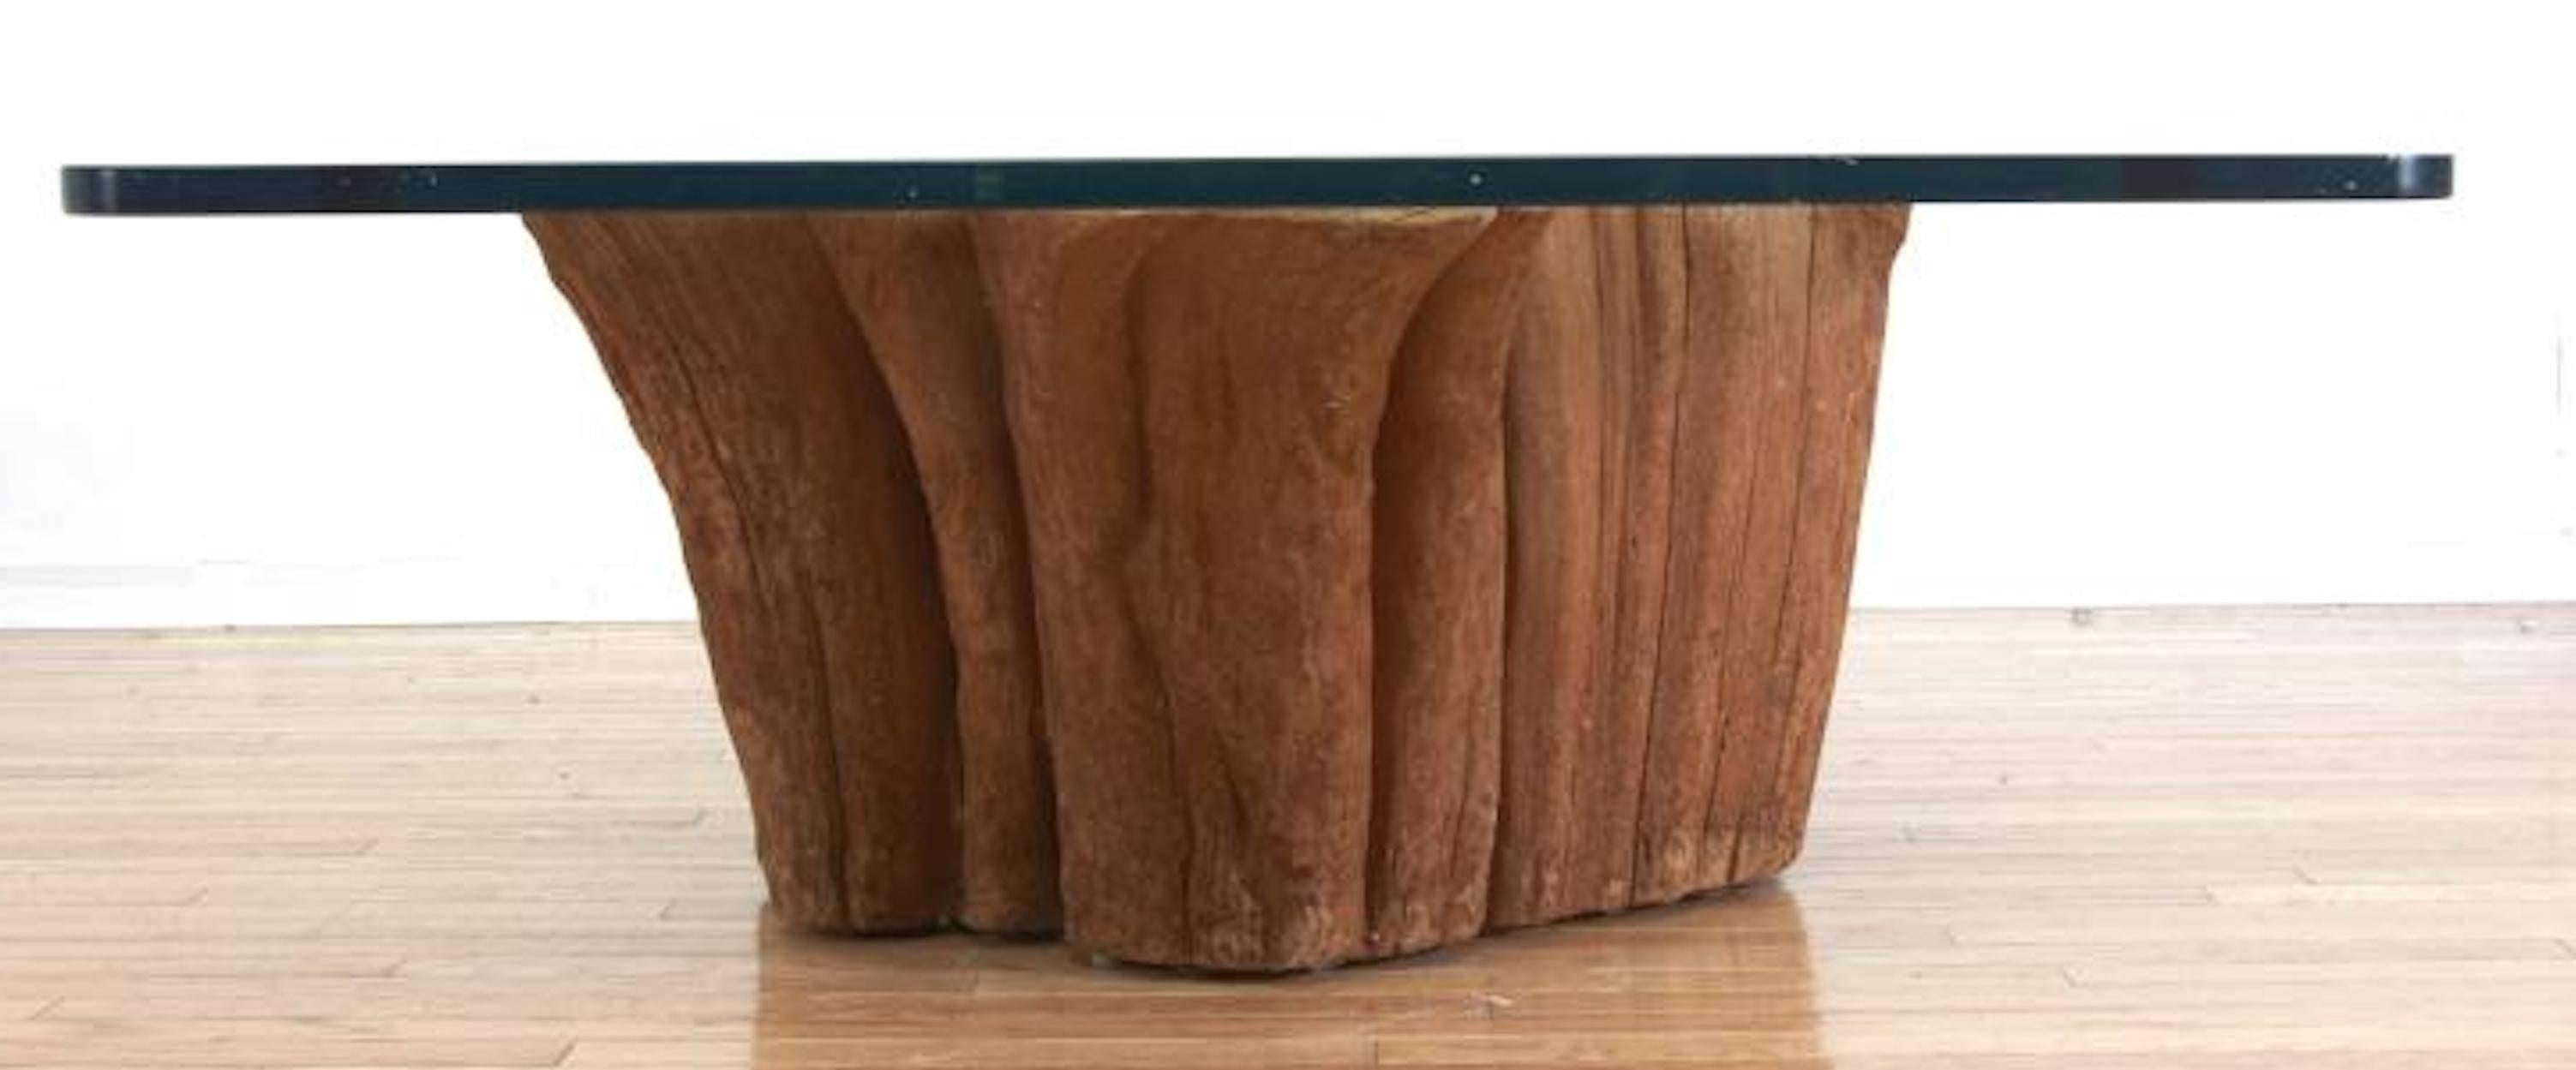 Organic Modern Redwood Trunk Coffee Table with Glass Top